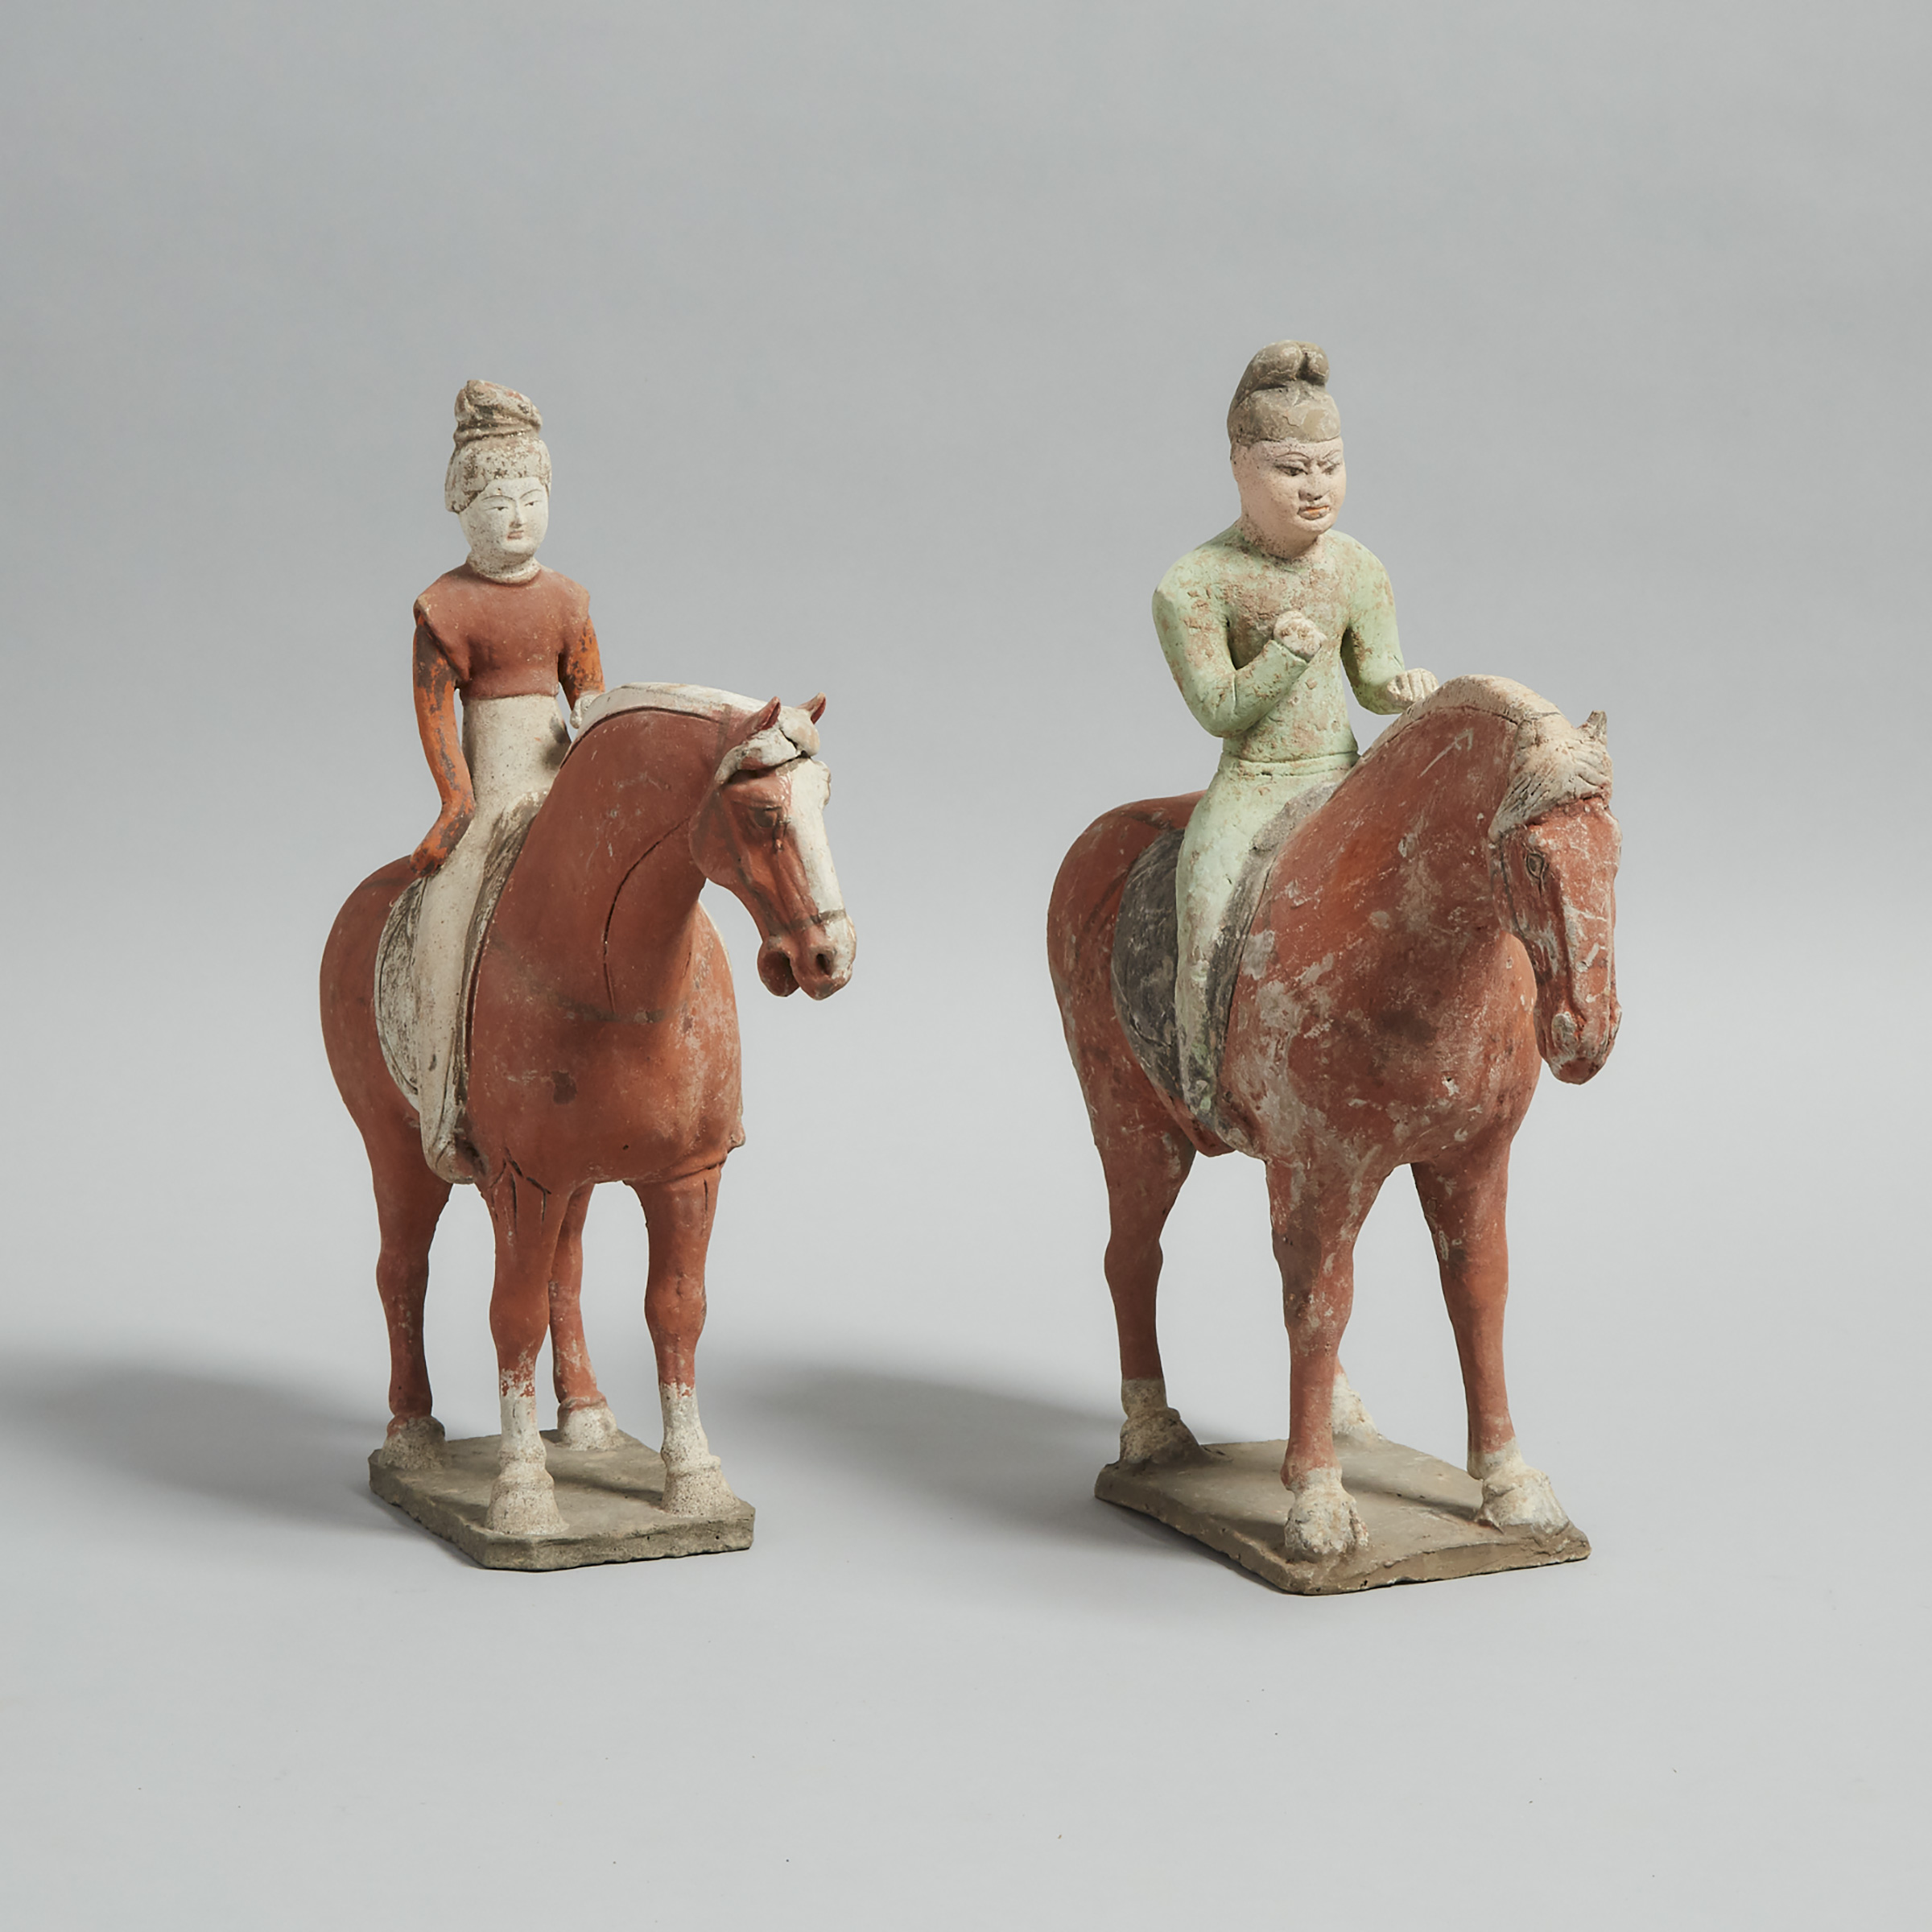 Two Pottery Figures of Horse Riders, Tang Dynasty